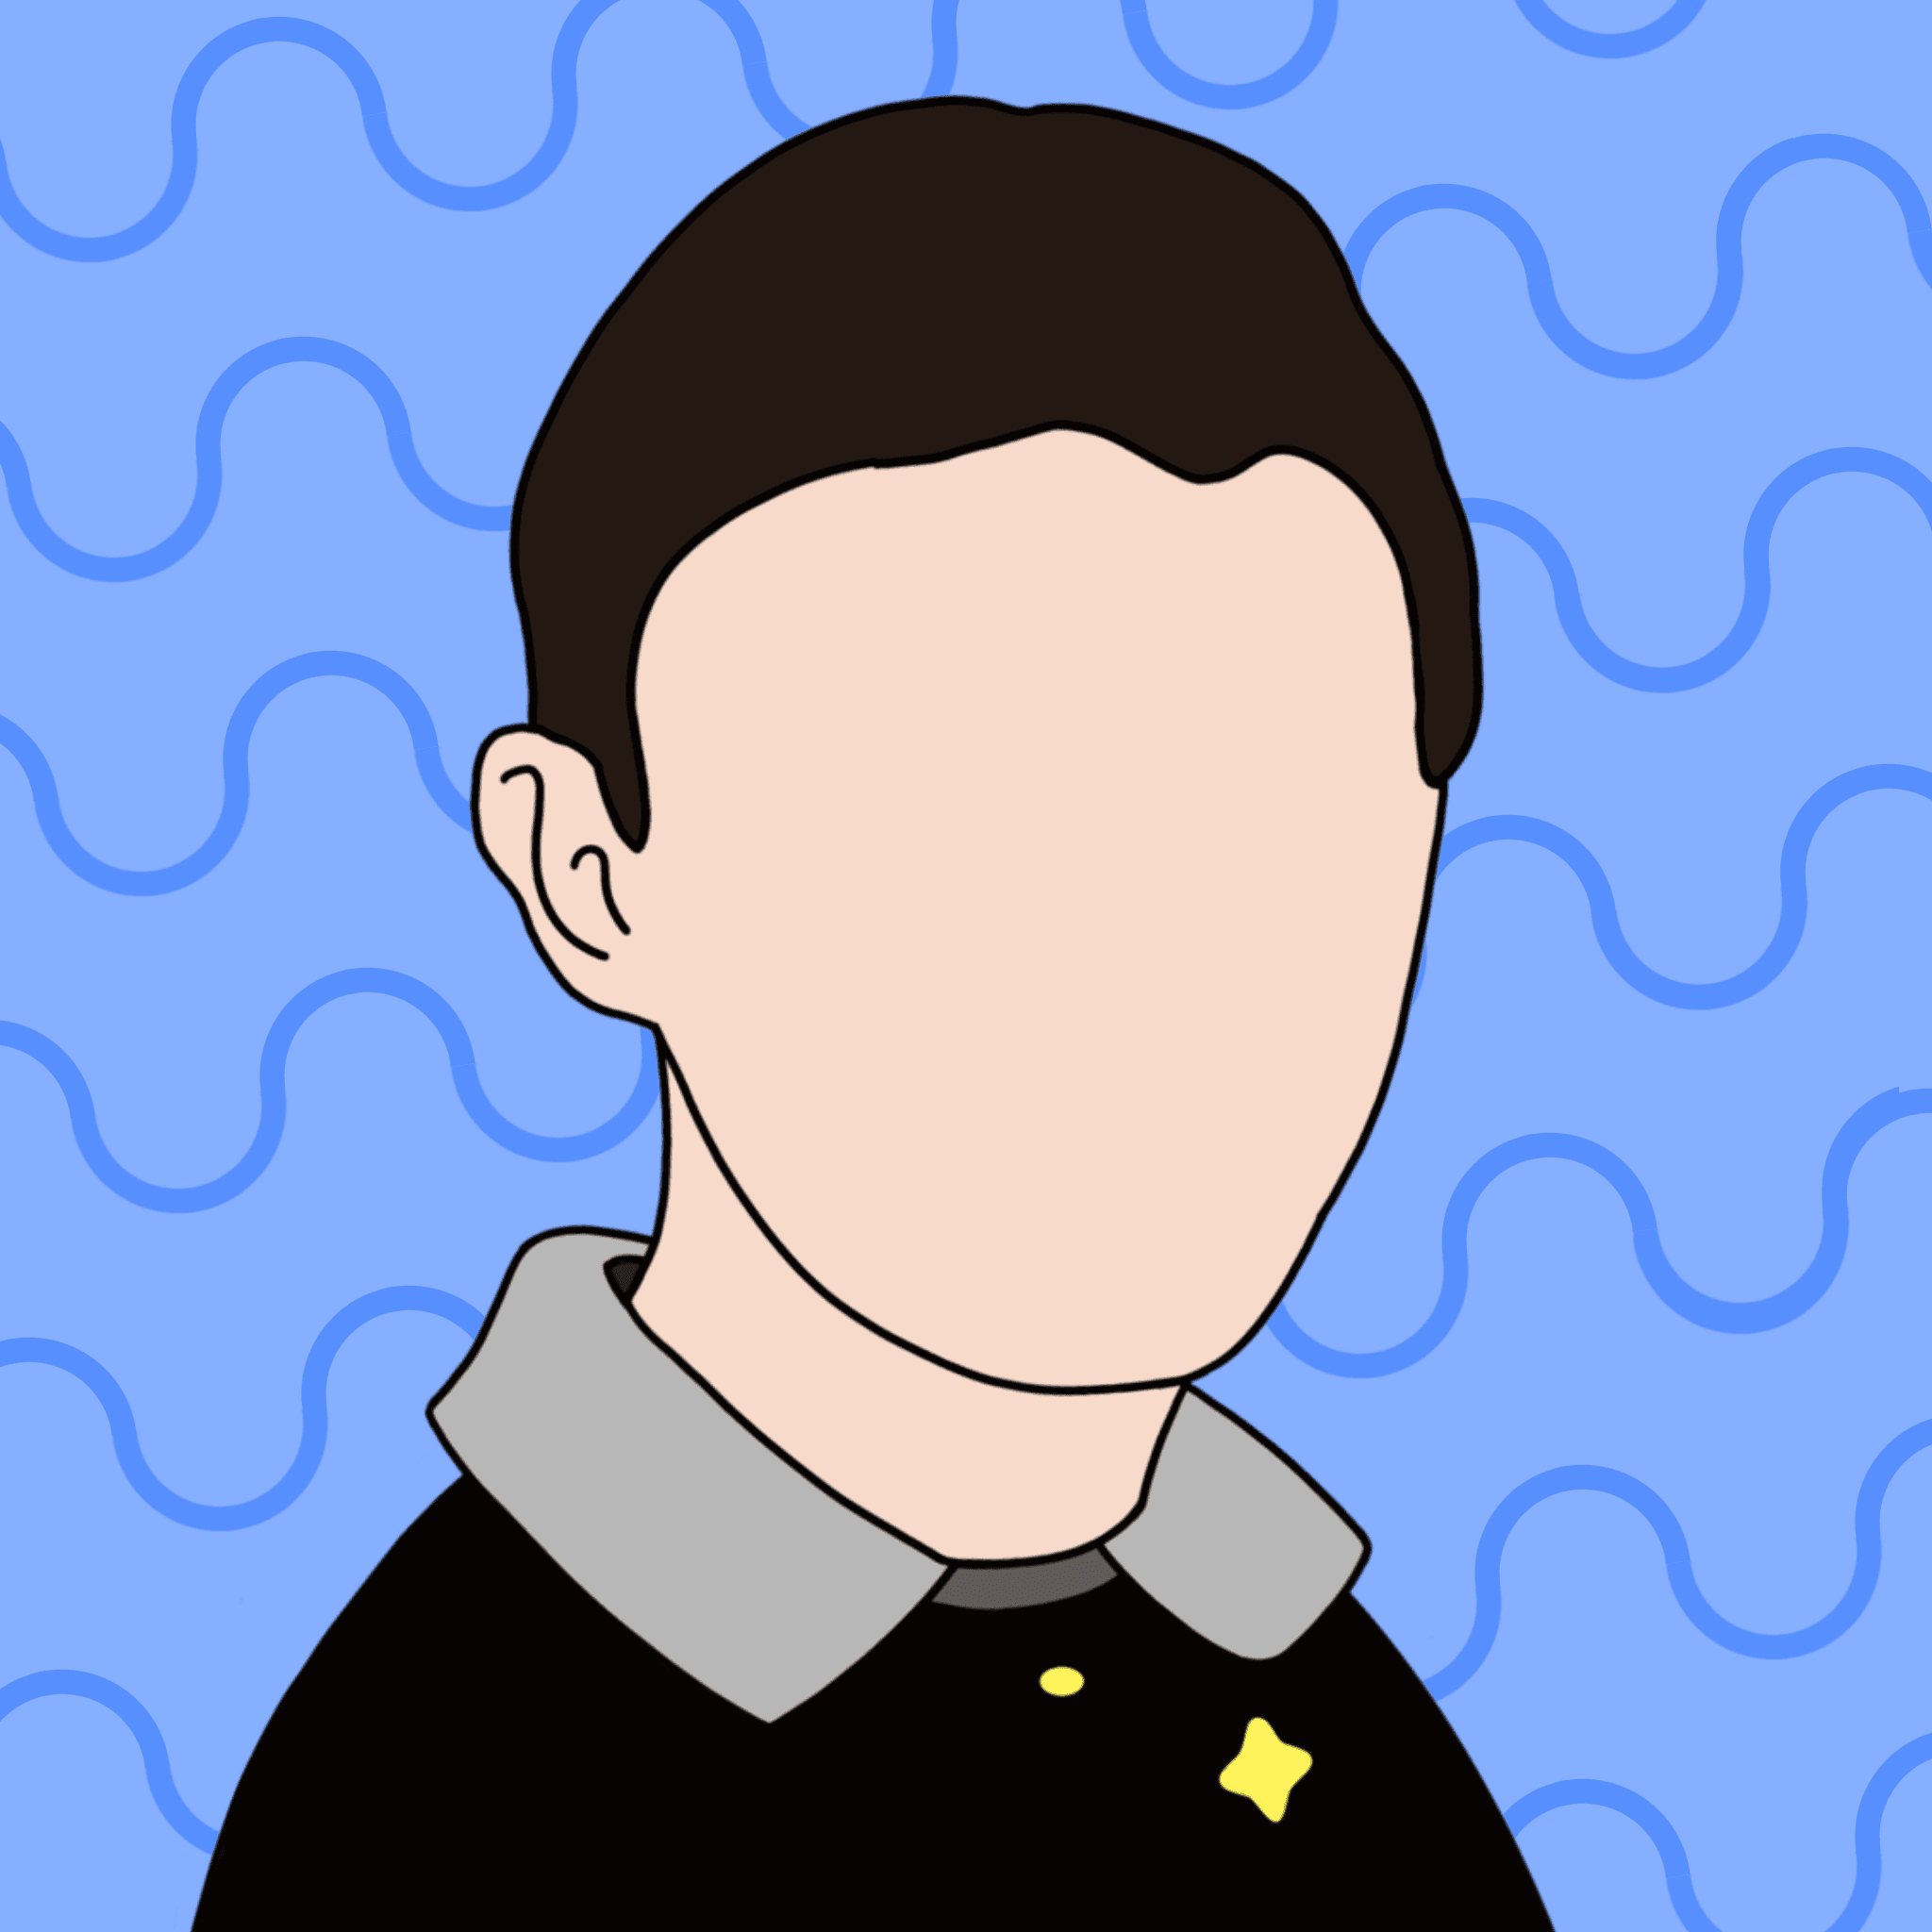 Ludo's avatar. A minimalist portrait of a faceless Ludo wearing a black shirt with a yellow sparkle pin. The background is light blue and decorated with a regular pattern of wavy lines.